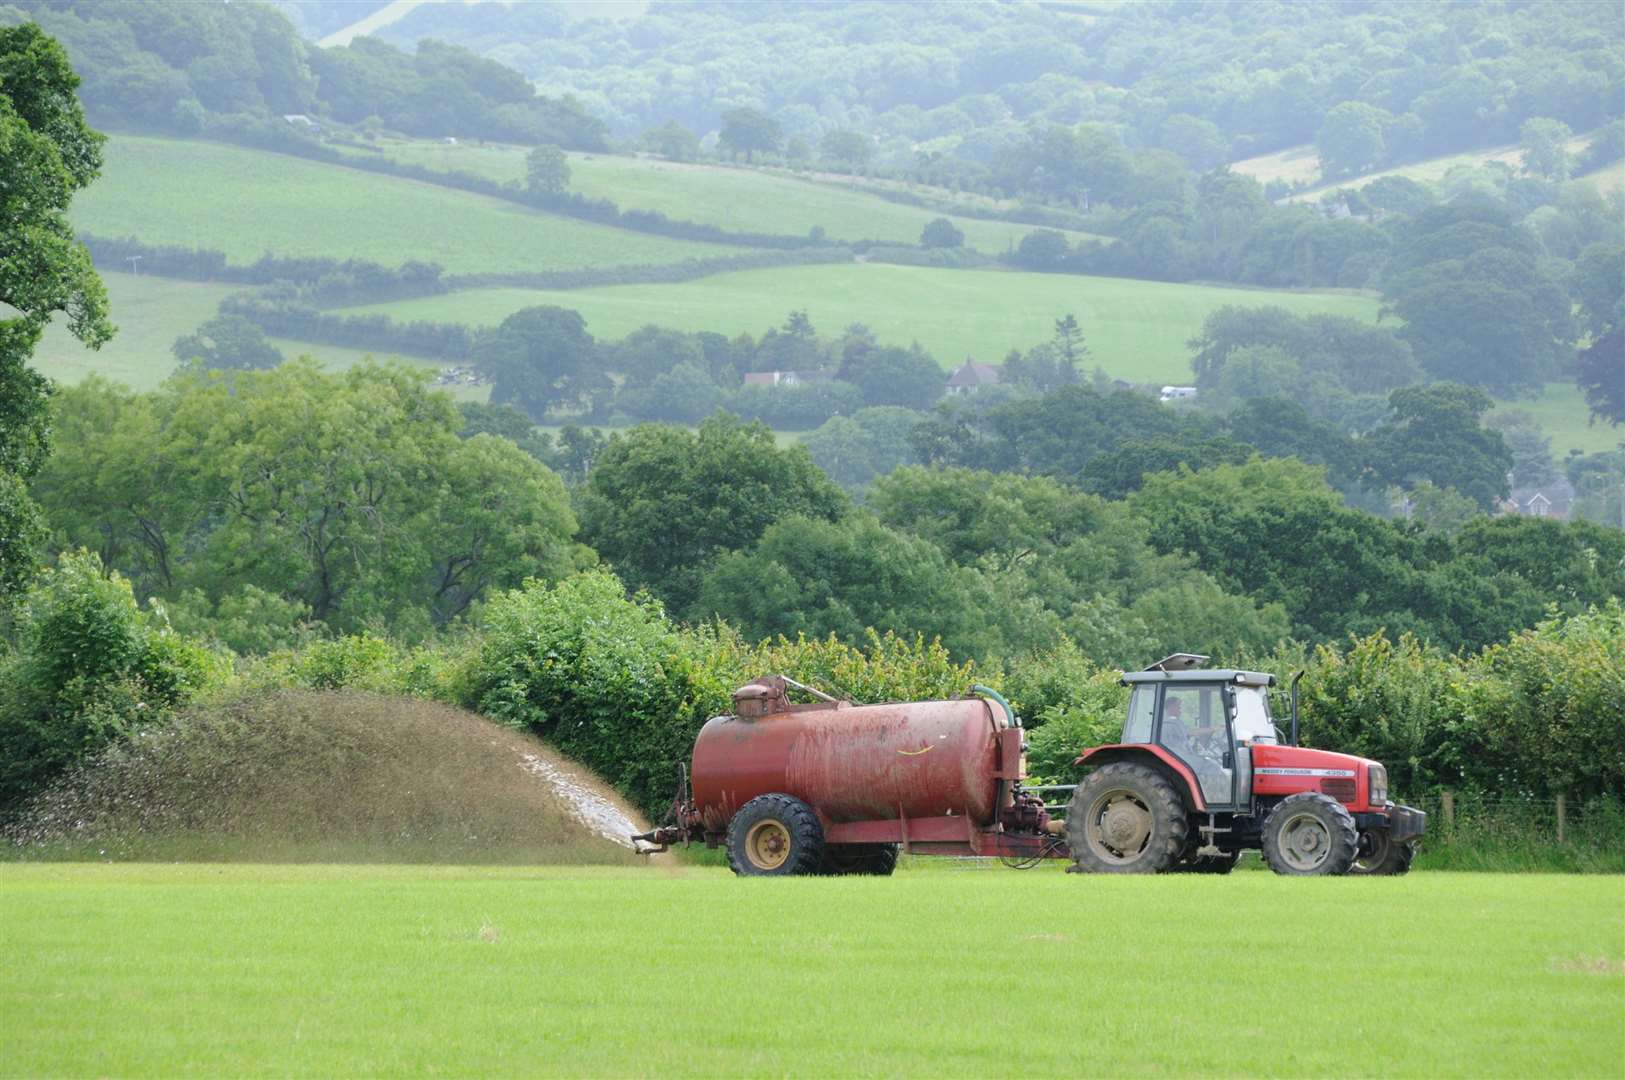 Muck-spreading on a farm. Thinkstock Image Library